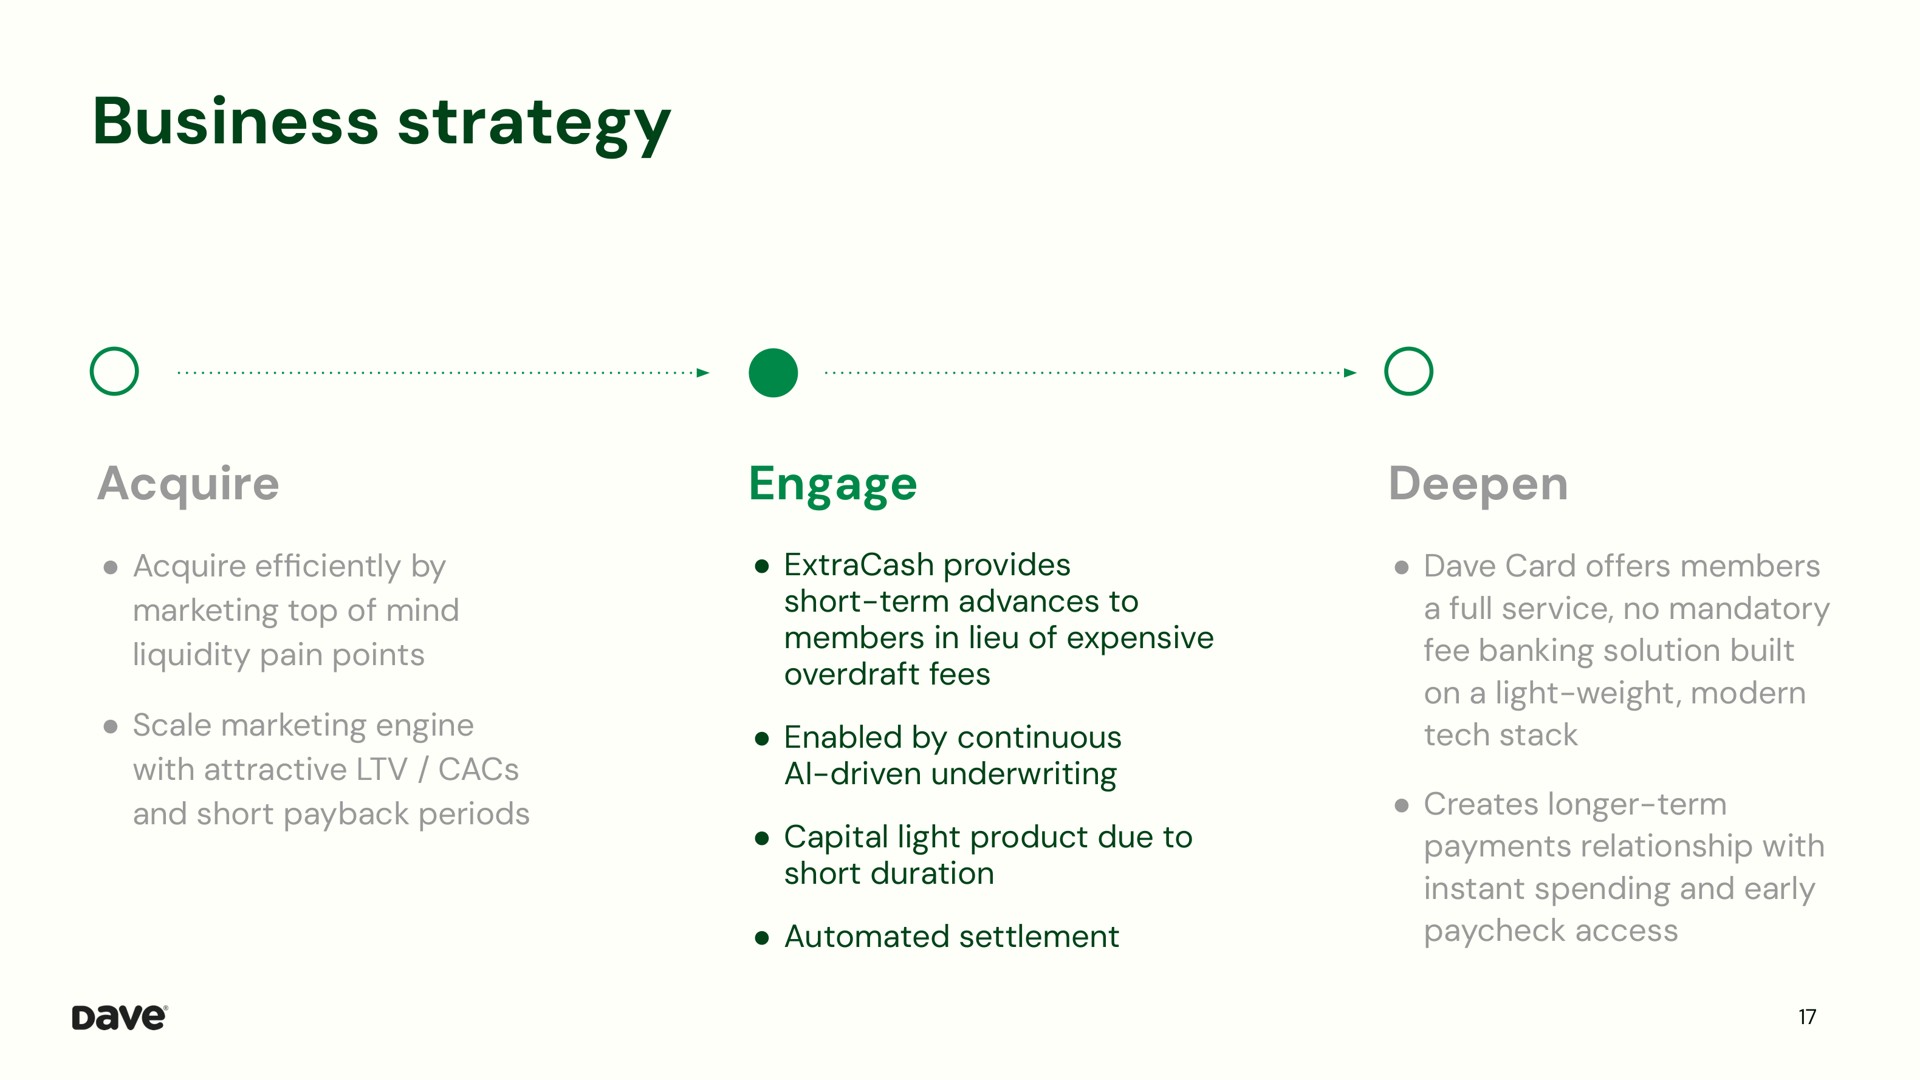 business strategy acquire engage deepen | Dave